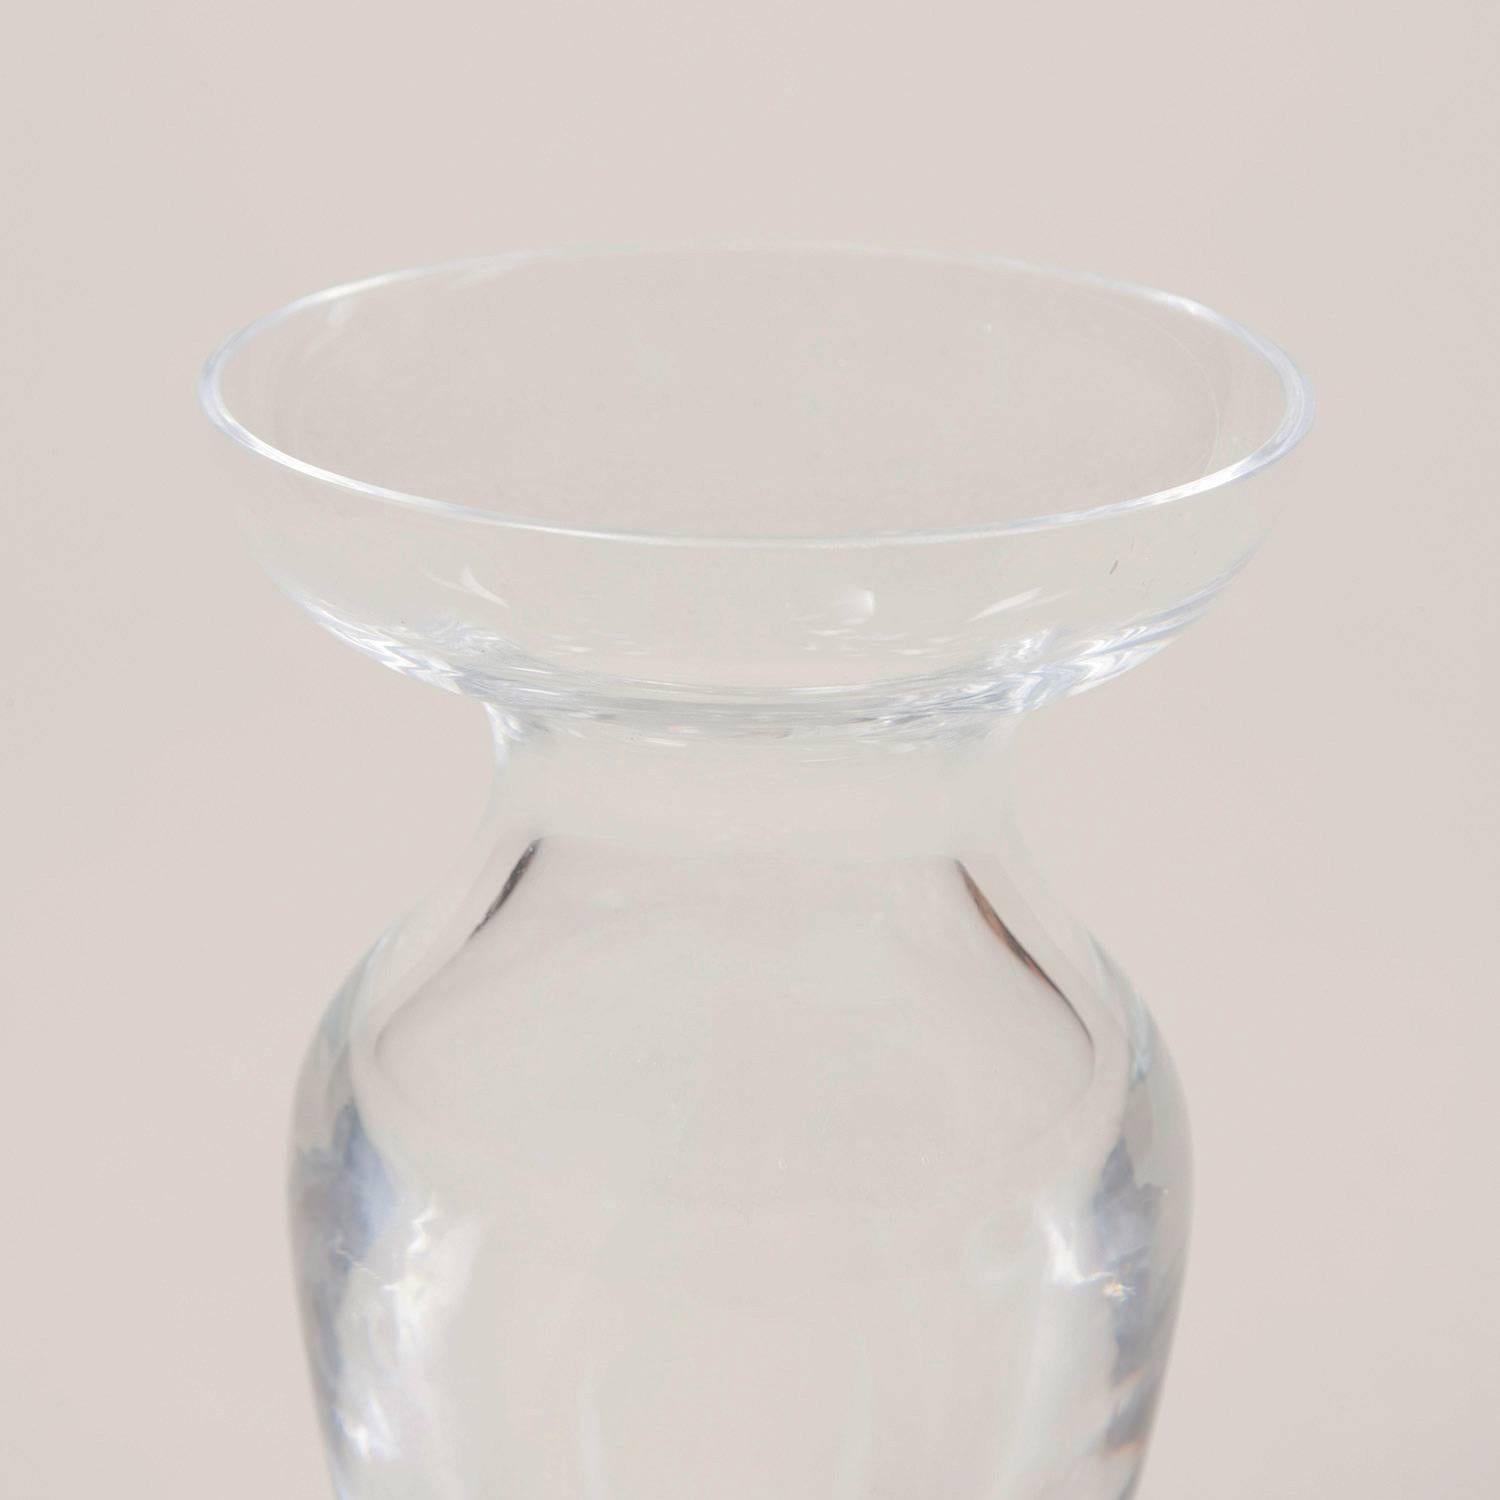 A Colefax and Fowler small urn shaped glass vase.